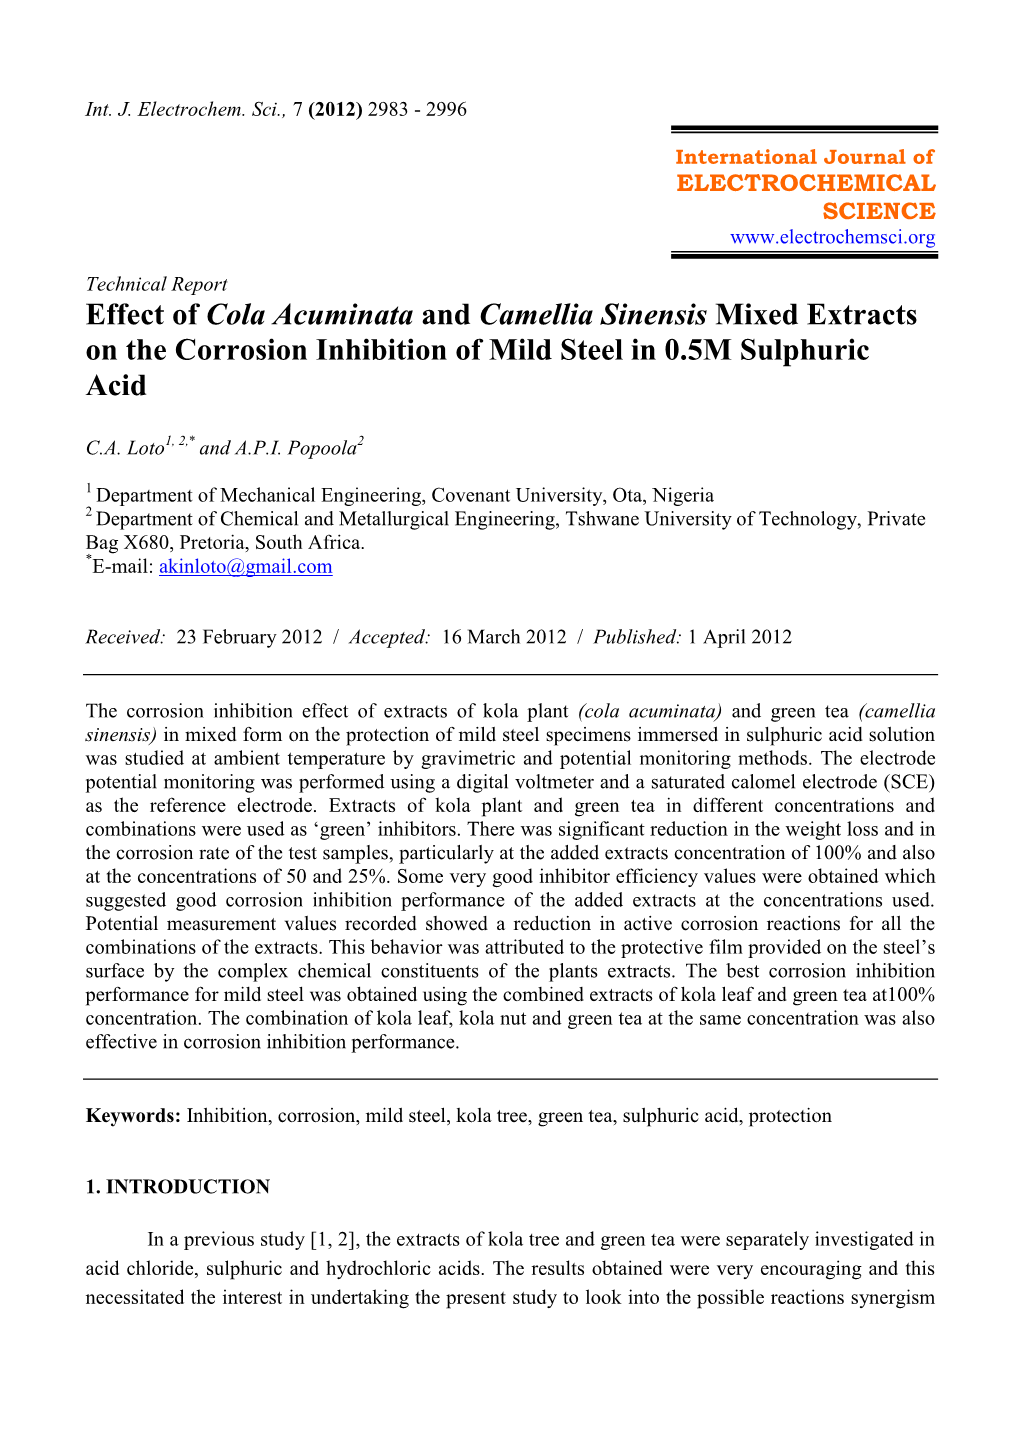 Effect of Cola Acuminata and Camellia Sinensis Mixed Extracts on the Corrosion Inhibition of Mild Steel in 0.5M Sulphuric Acid